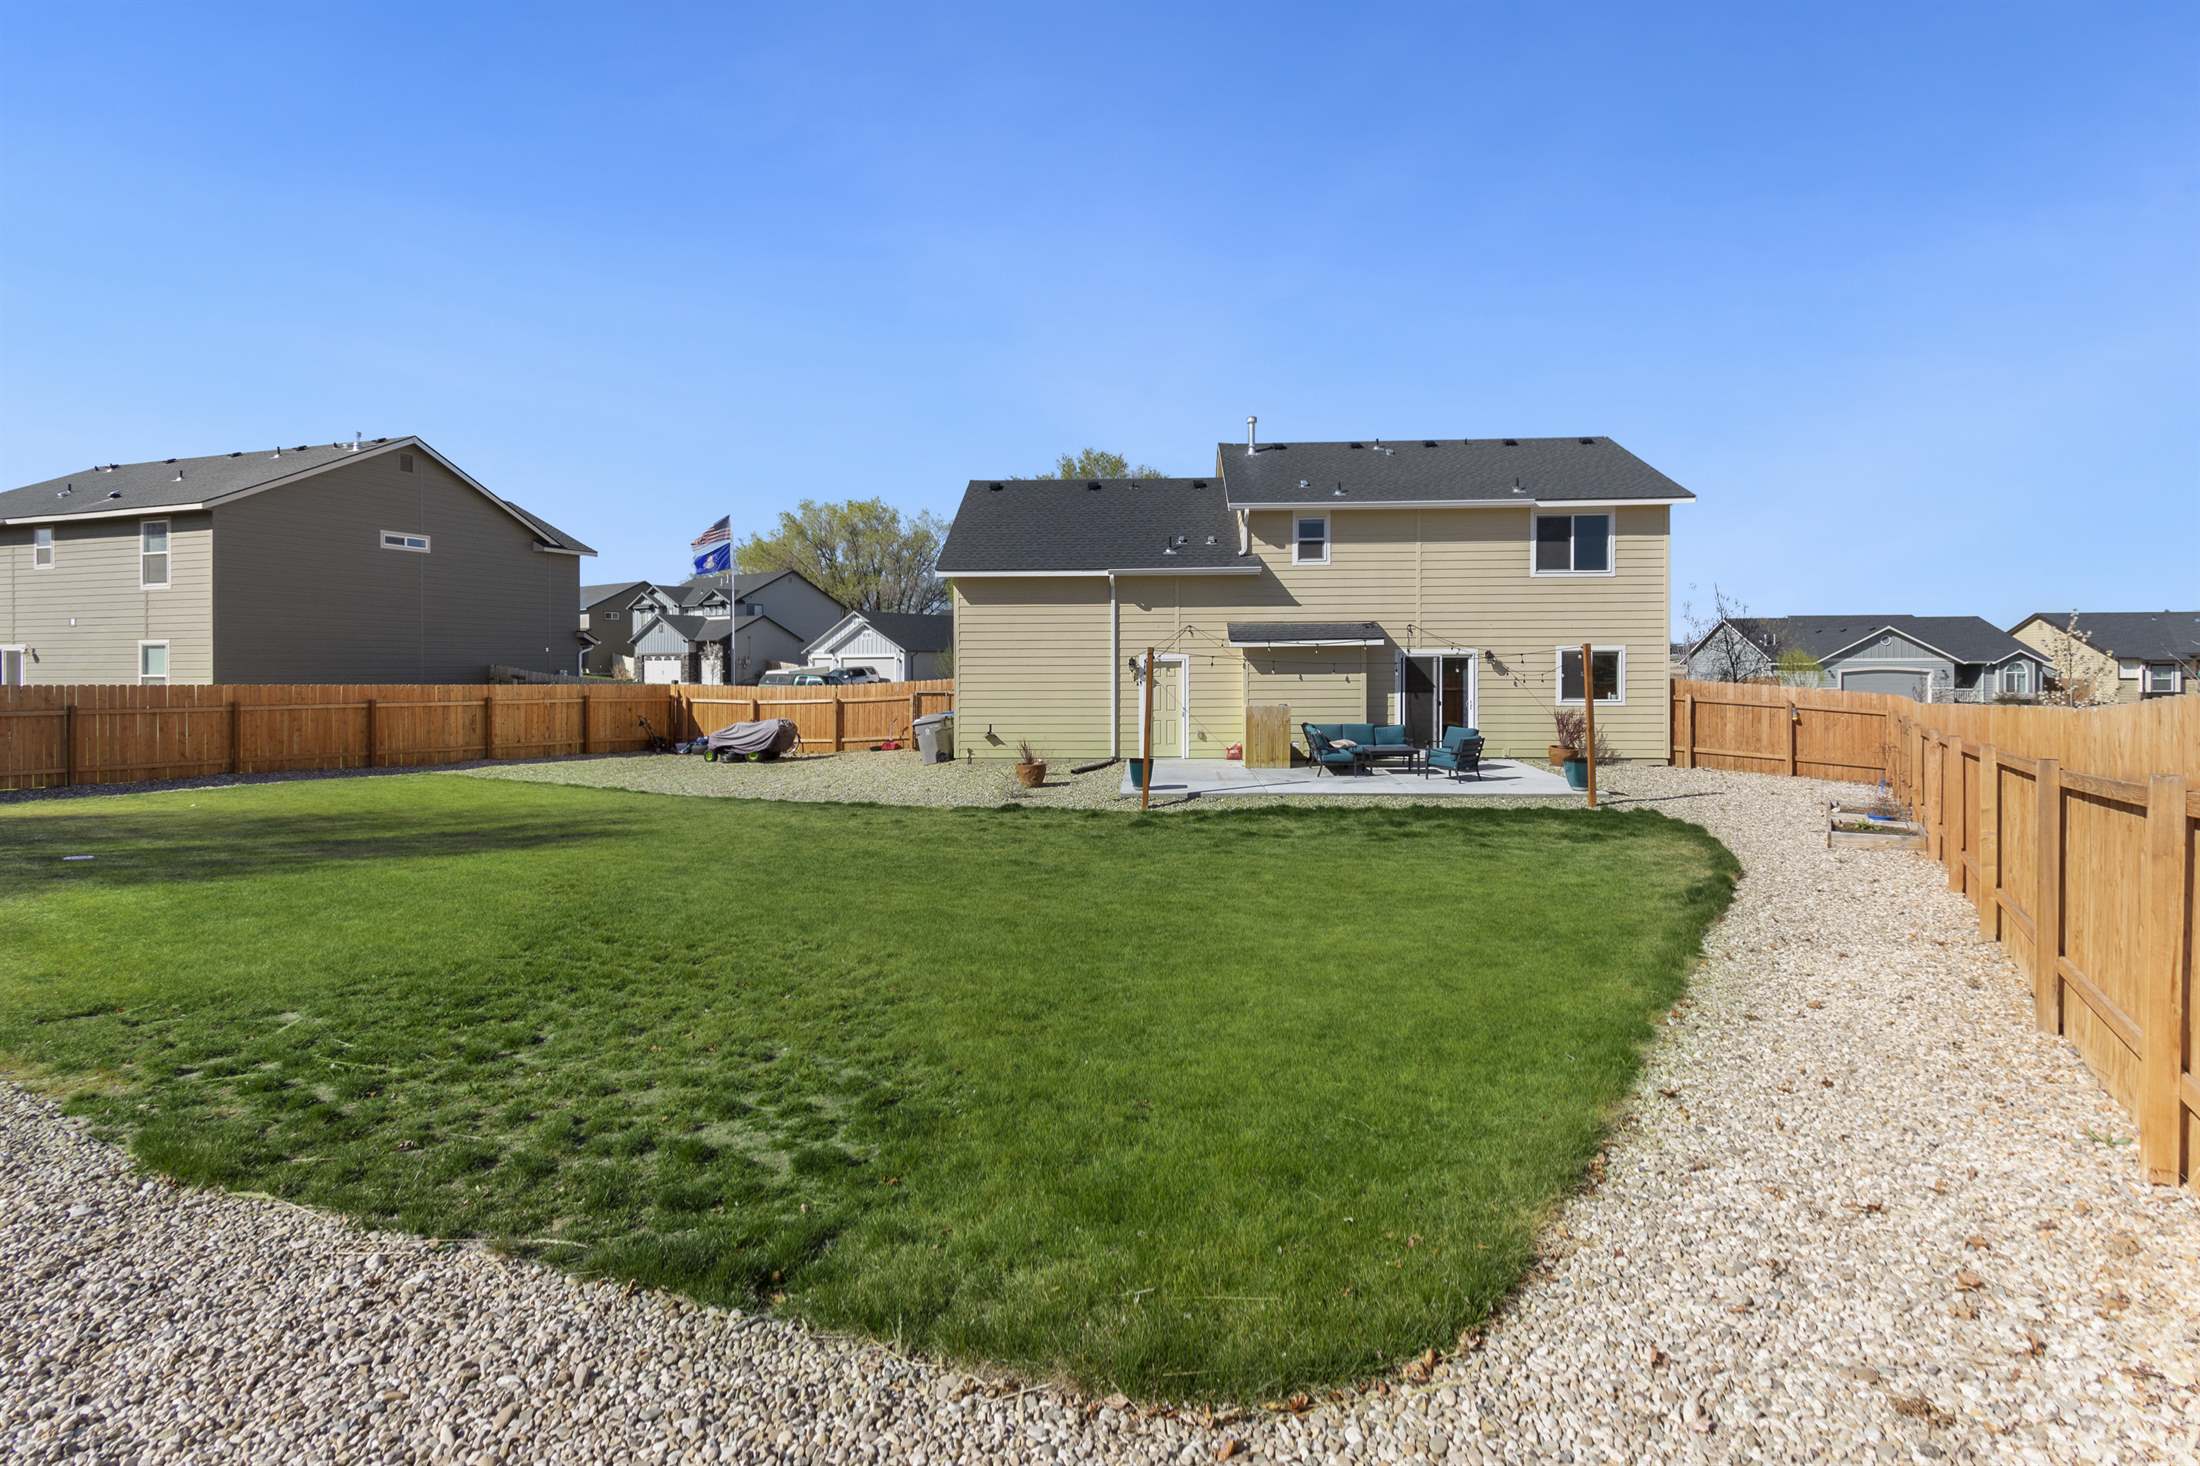 3420 S. Fork Ave., Nampa, ID 83686